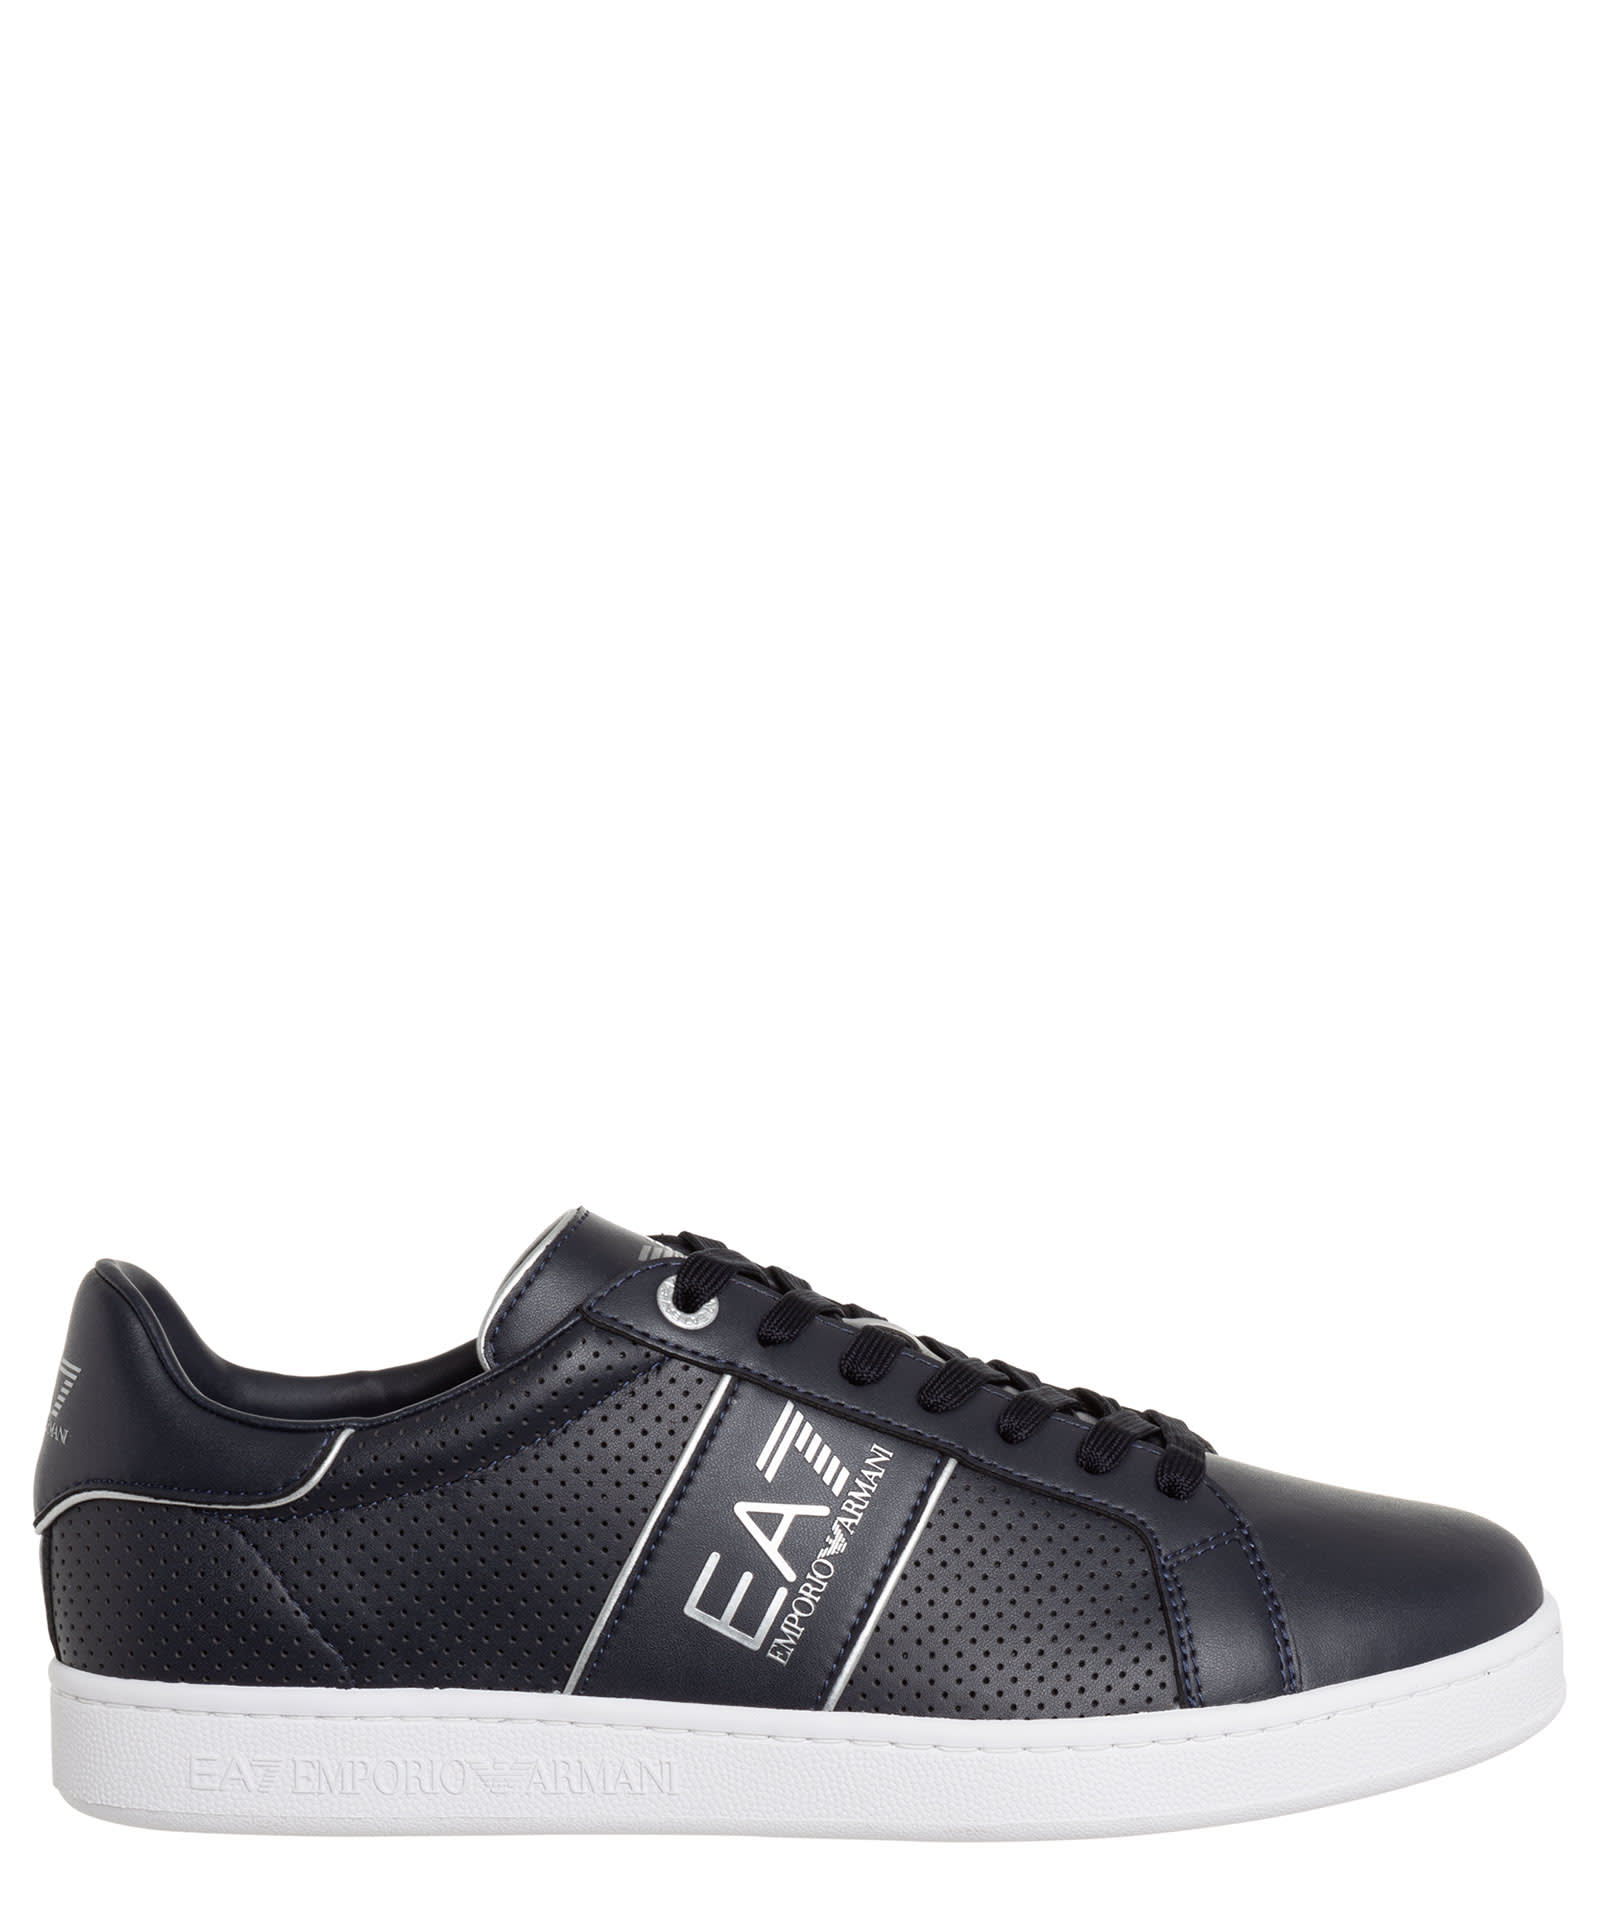 EA7 Classic Performance Leather Sneakers